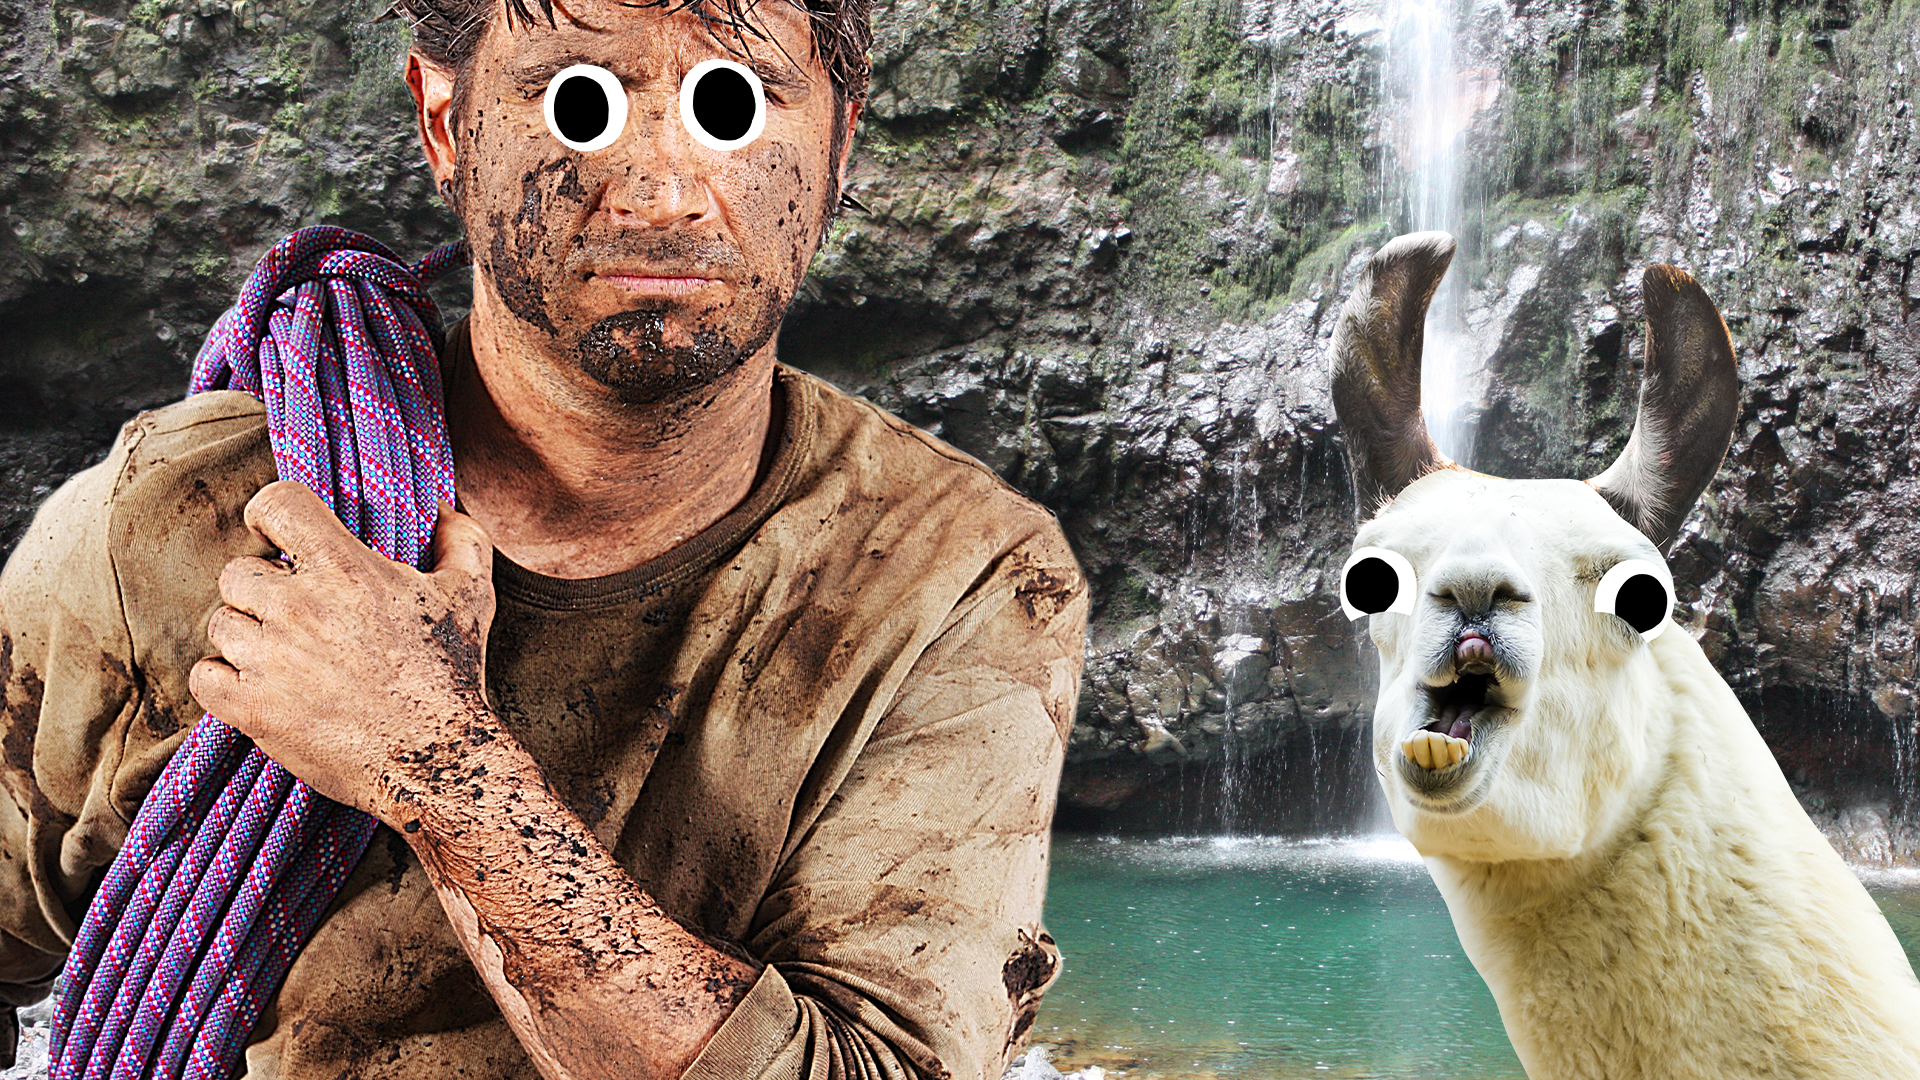 Tough out door man and derpy llama next to waterfall